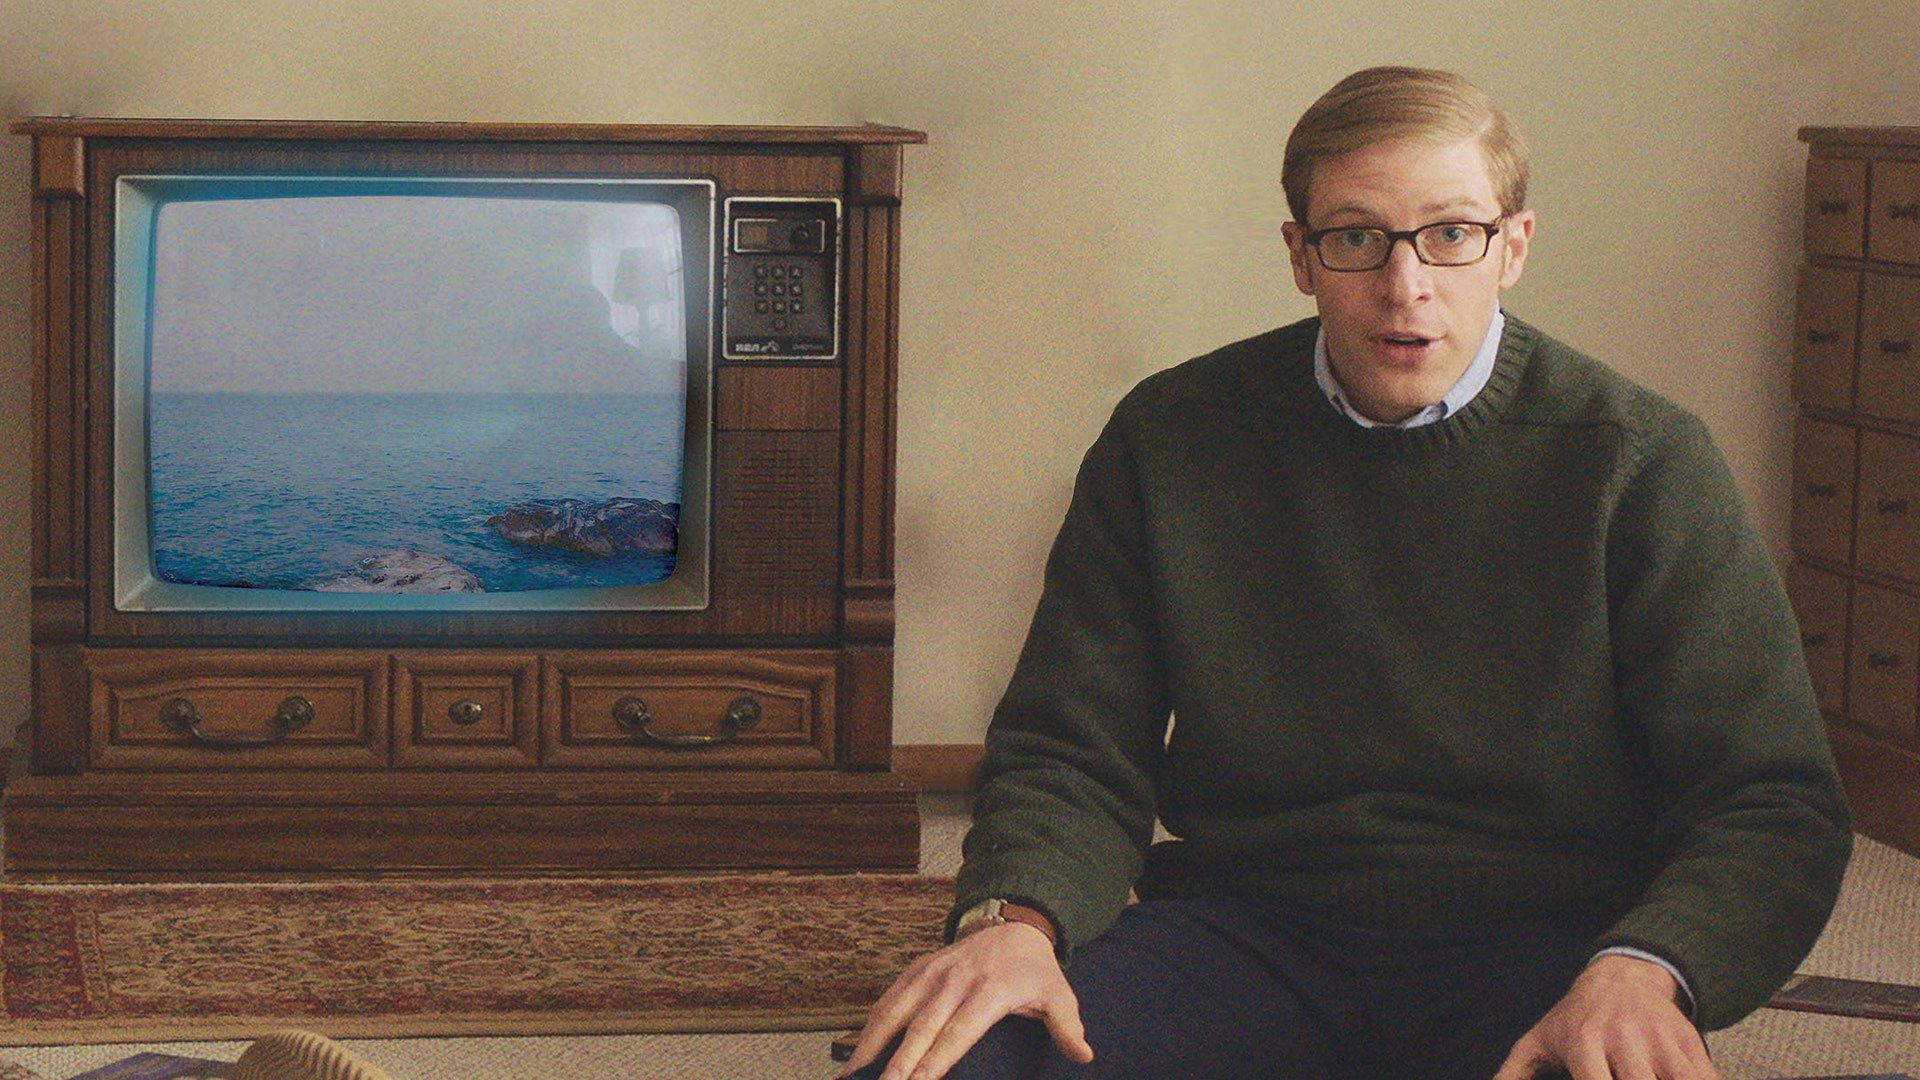 Joe Pera Talks To You About the Rat Wars of Alberta, Canada, 1950 - Present Day